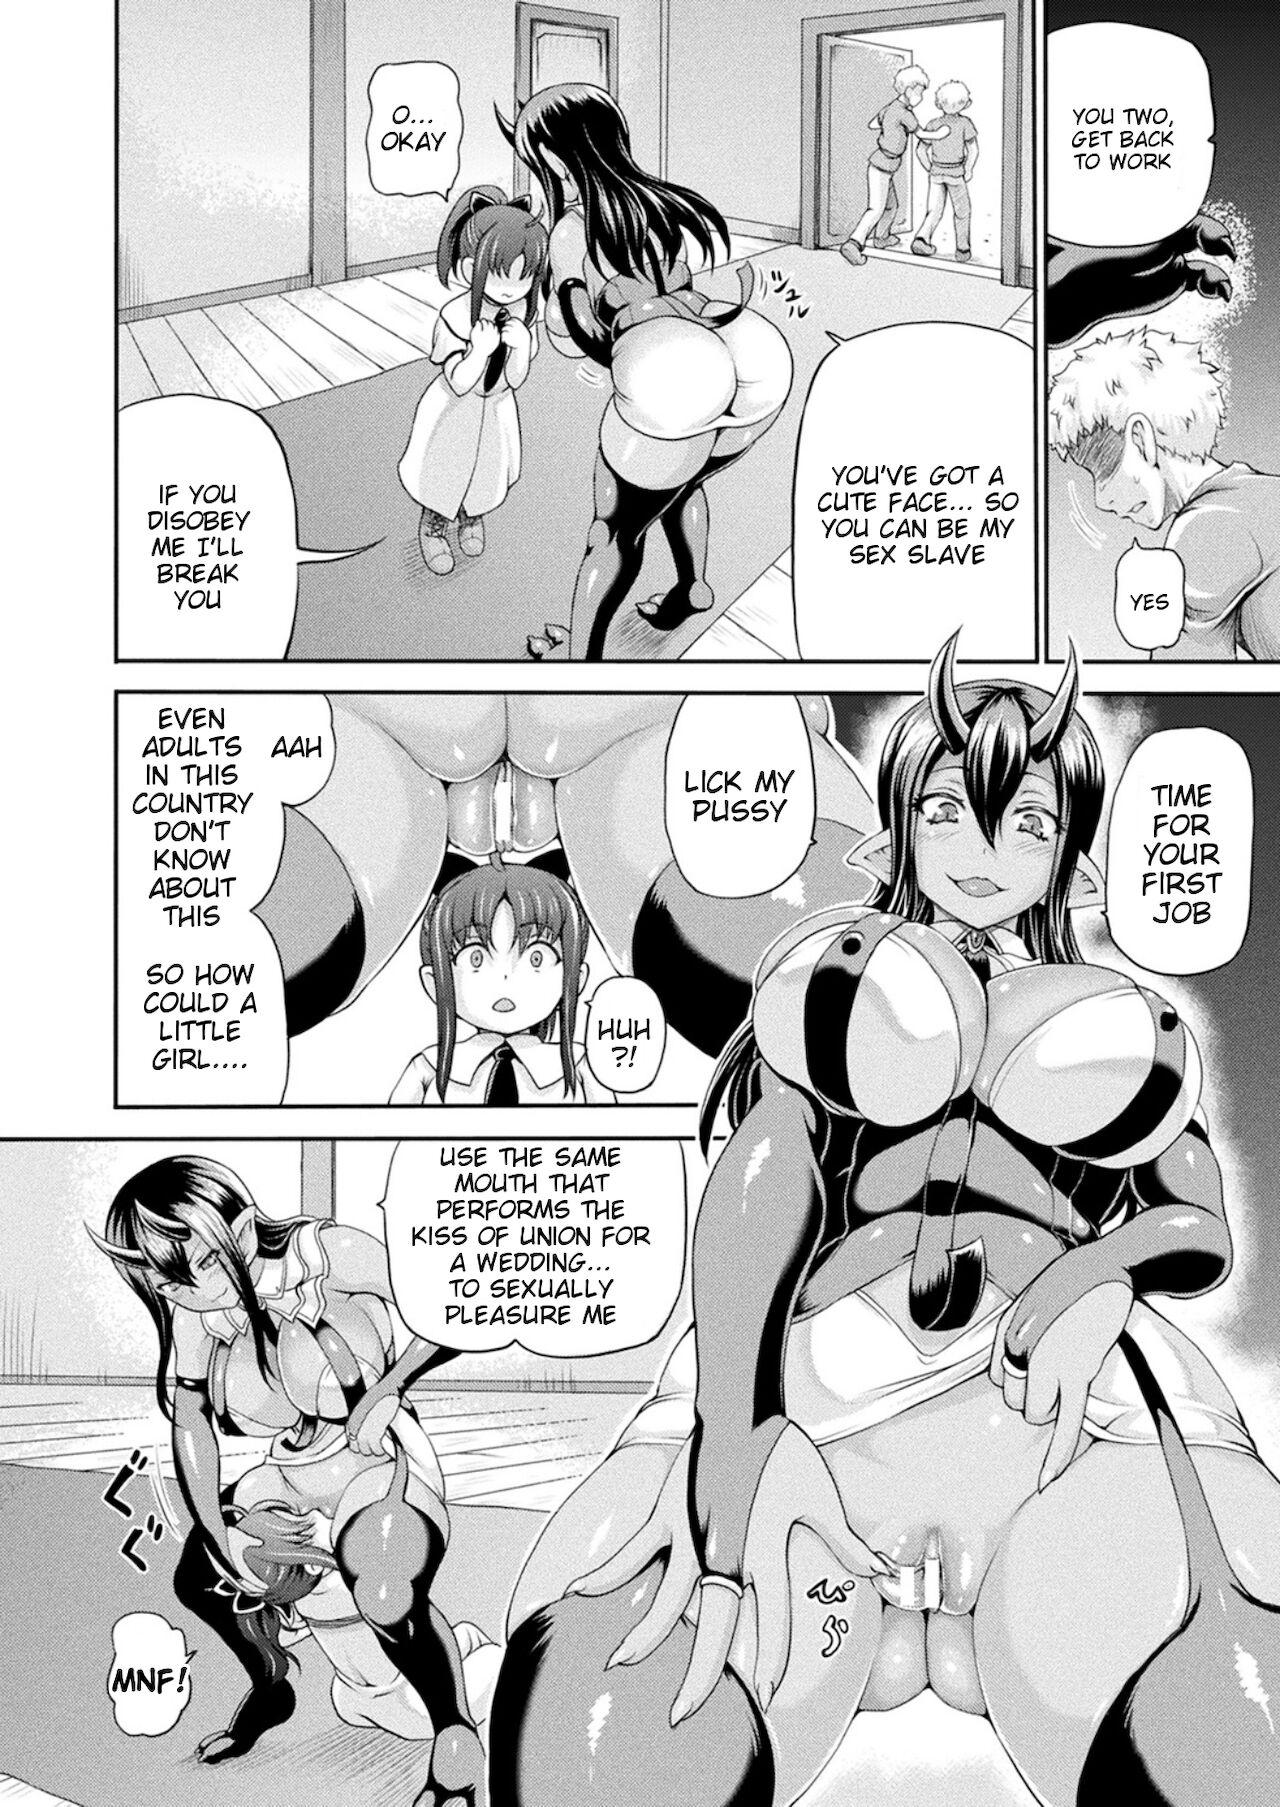 Hard Core Free Porn Isekai Shoukan Chapter 16 Licking Pussy - Page 2